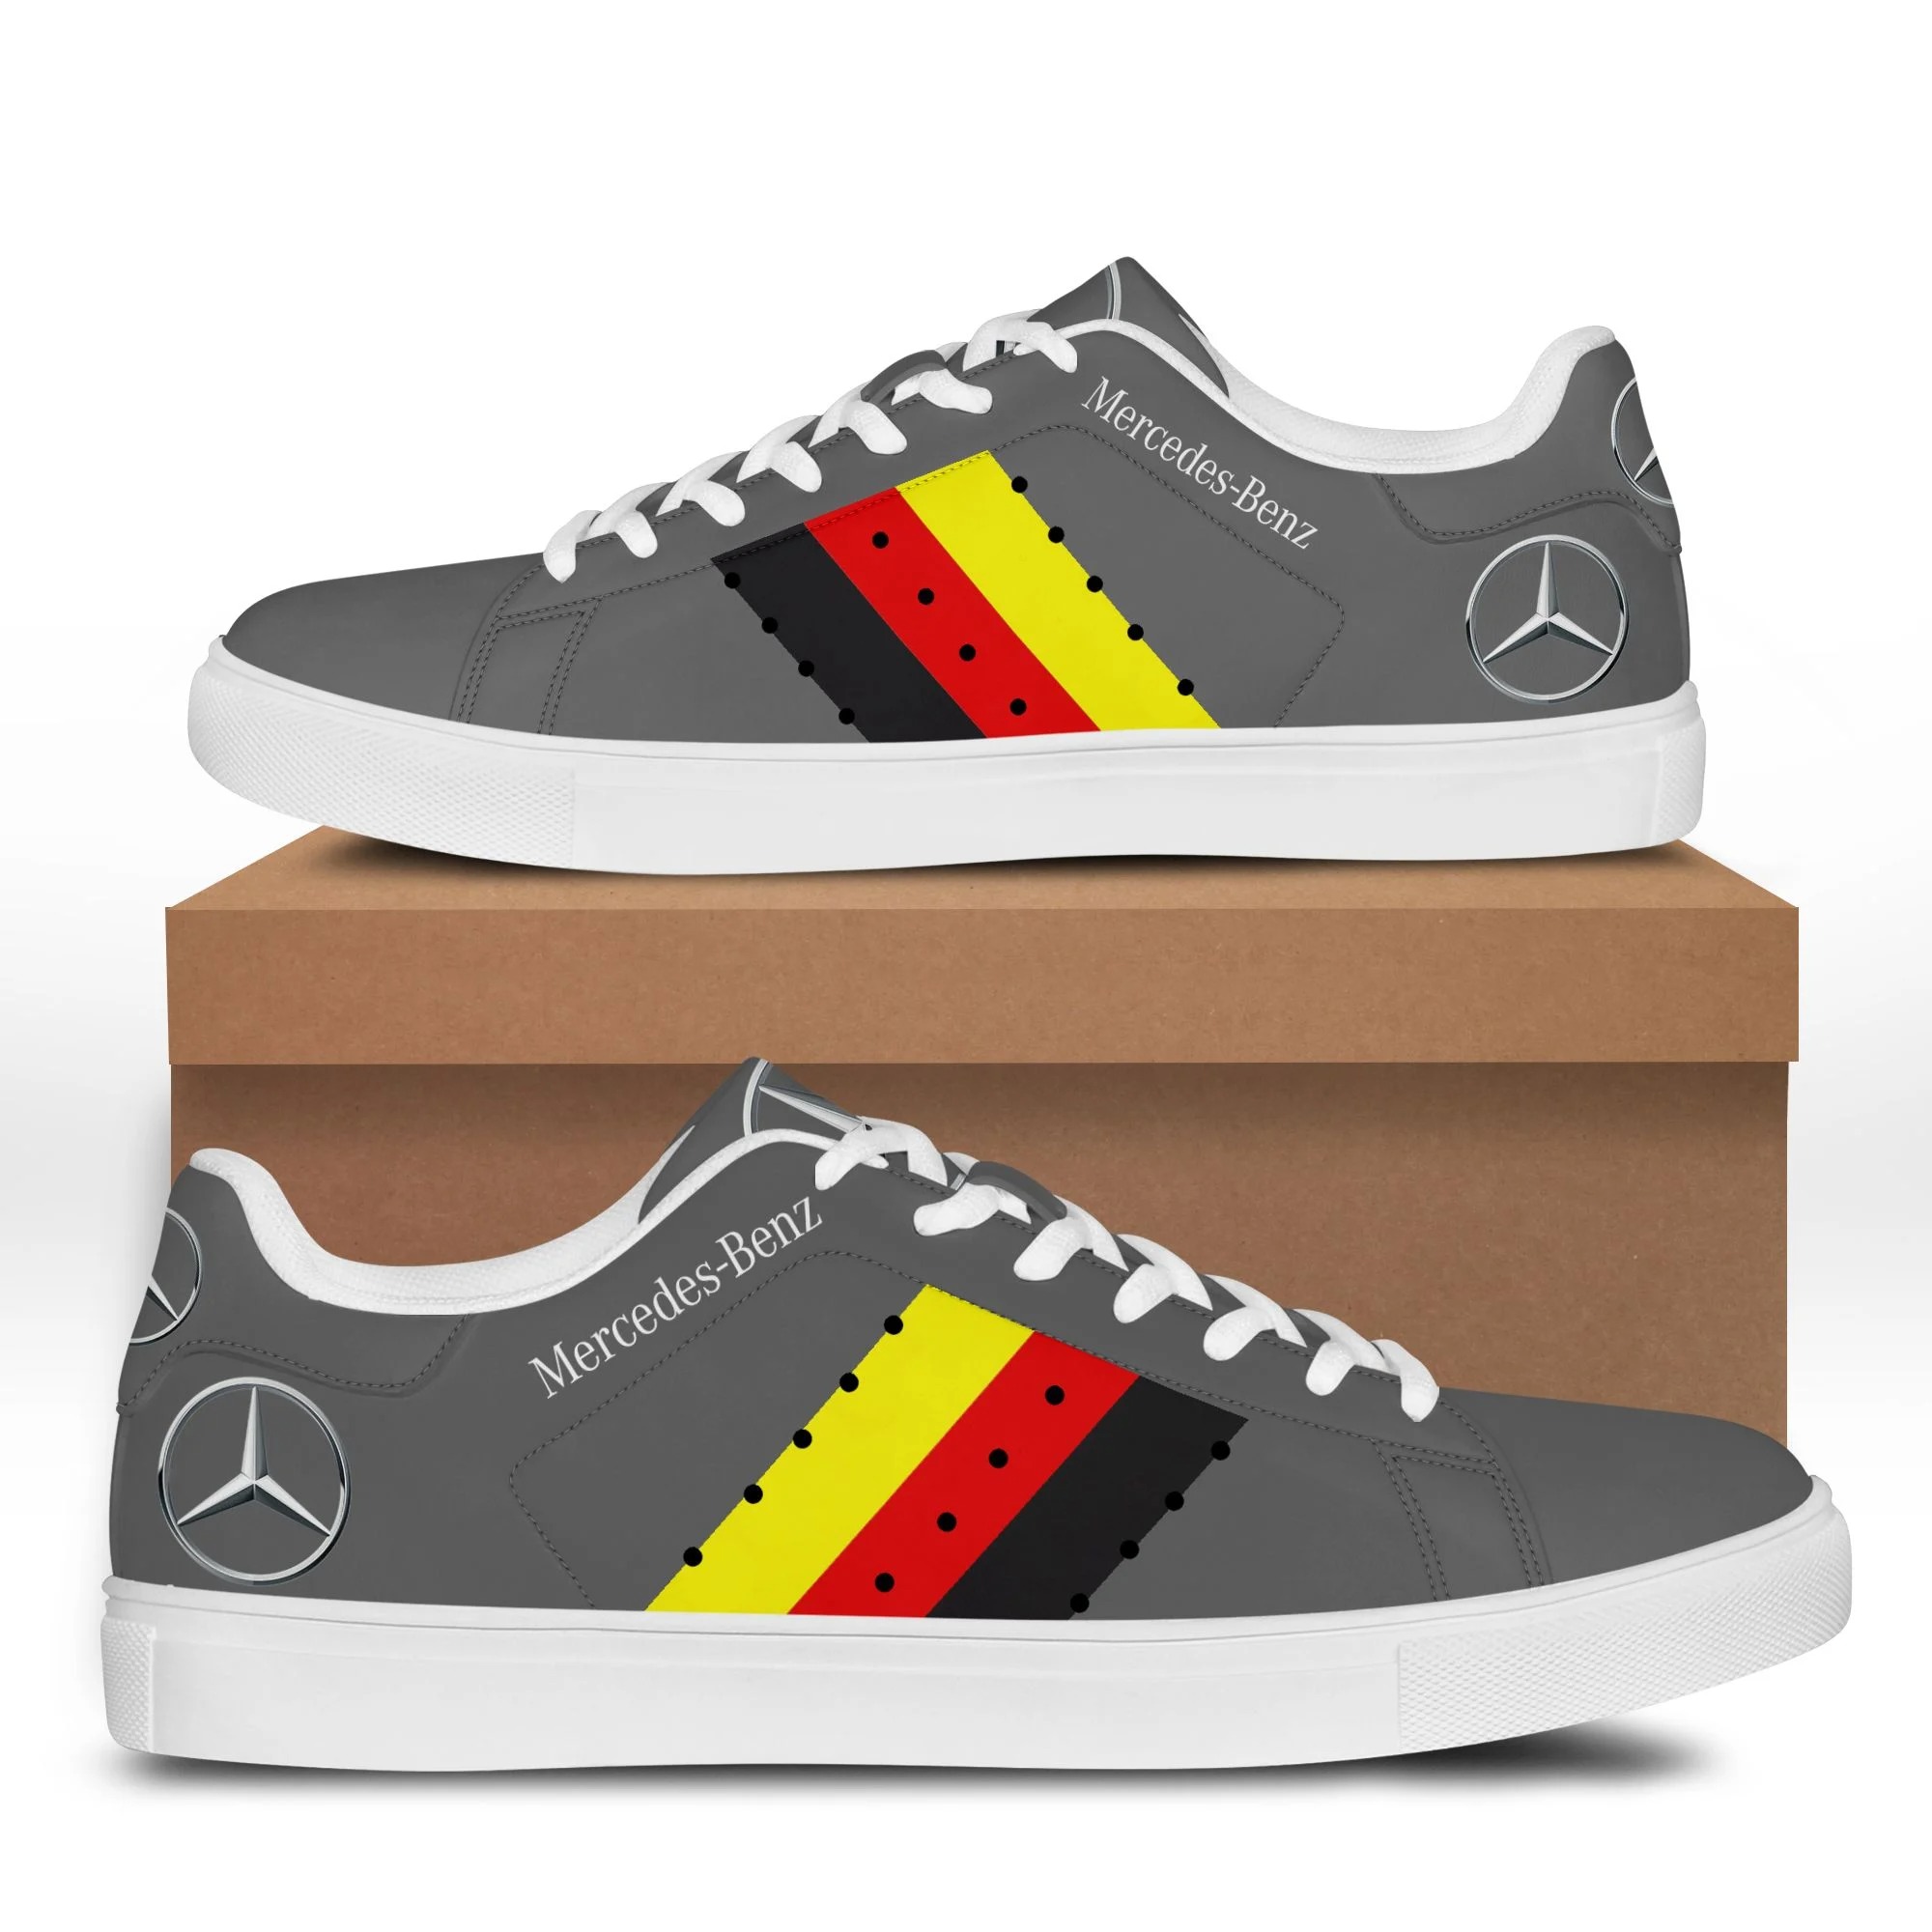 Mercedes-benz stan smith low top shoes 3